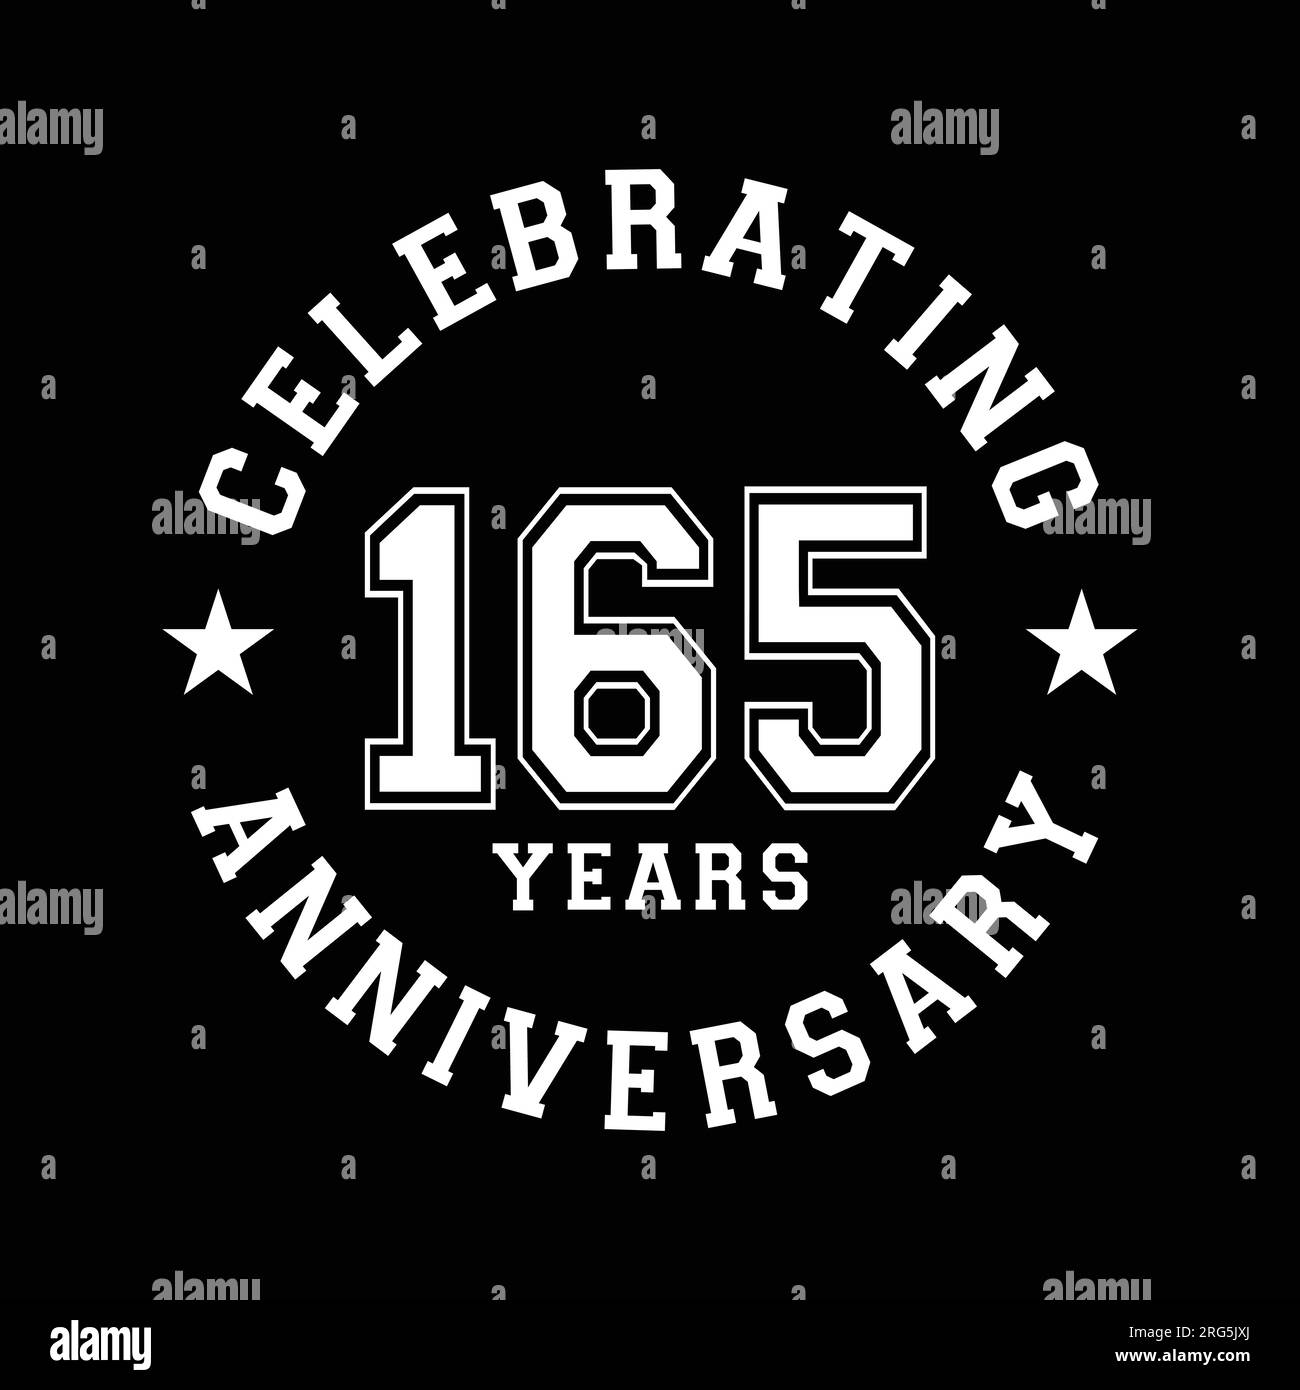 165 years anniversary celebration design template. 165th vector and illustration. Stock Vector